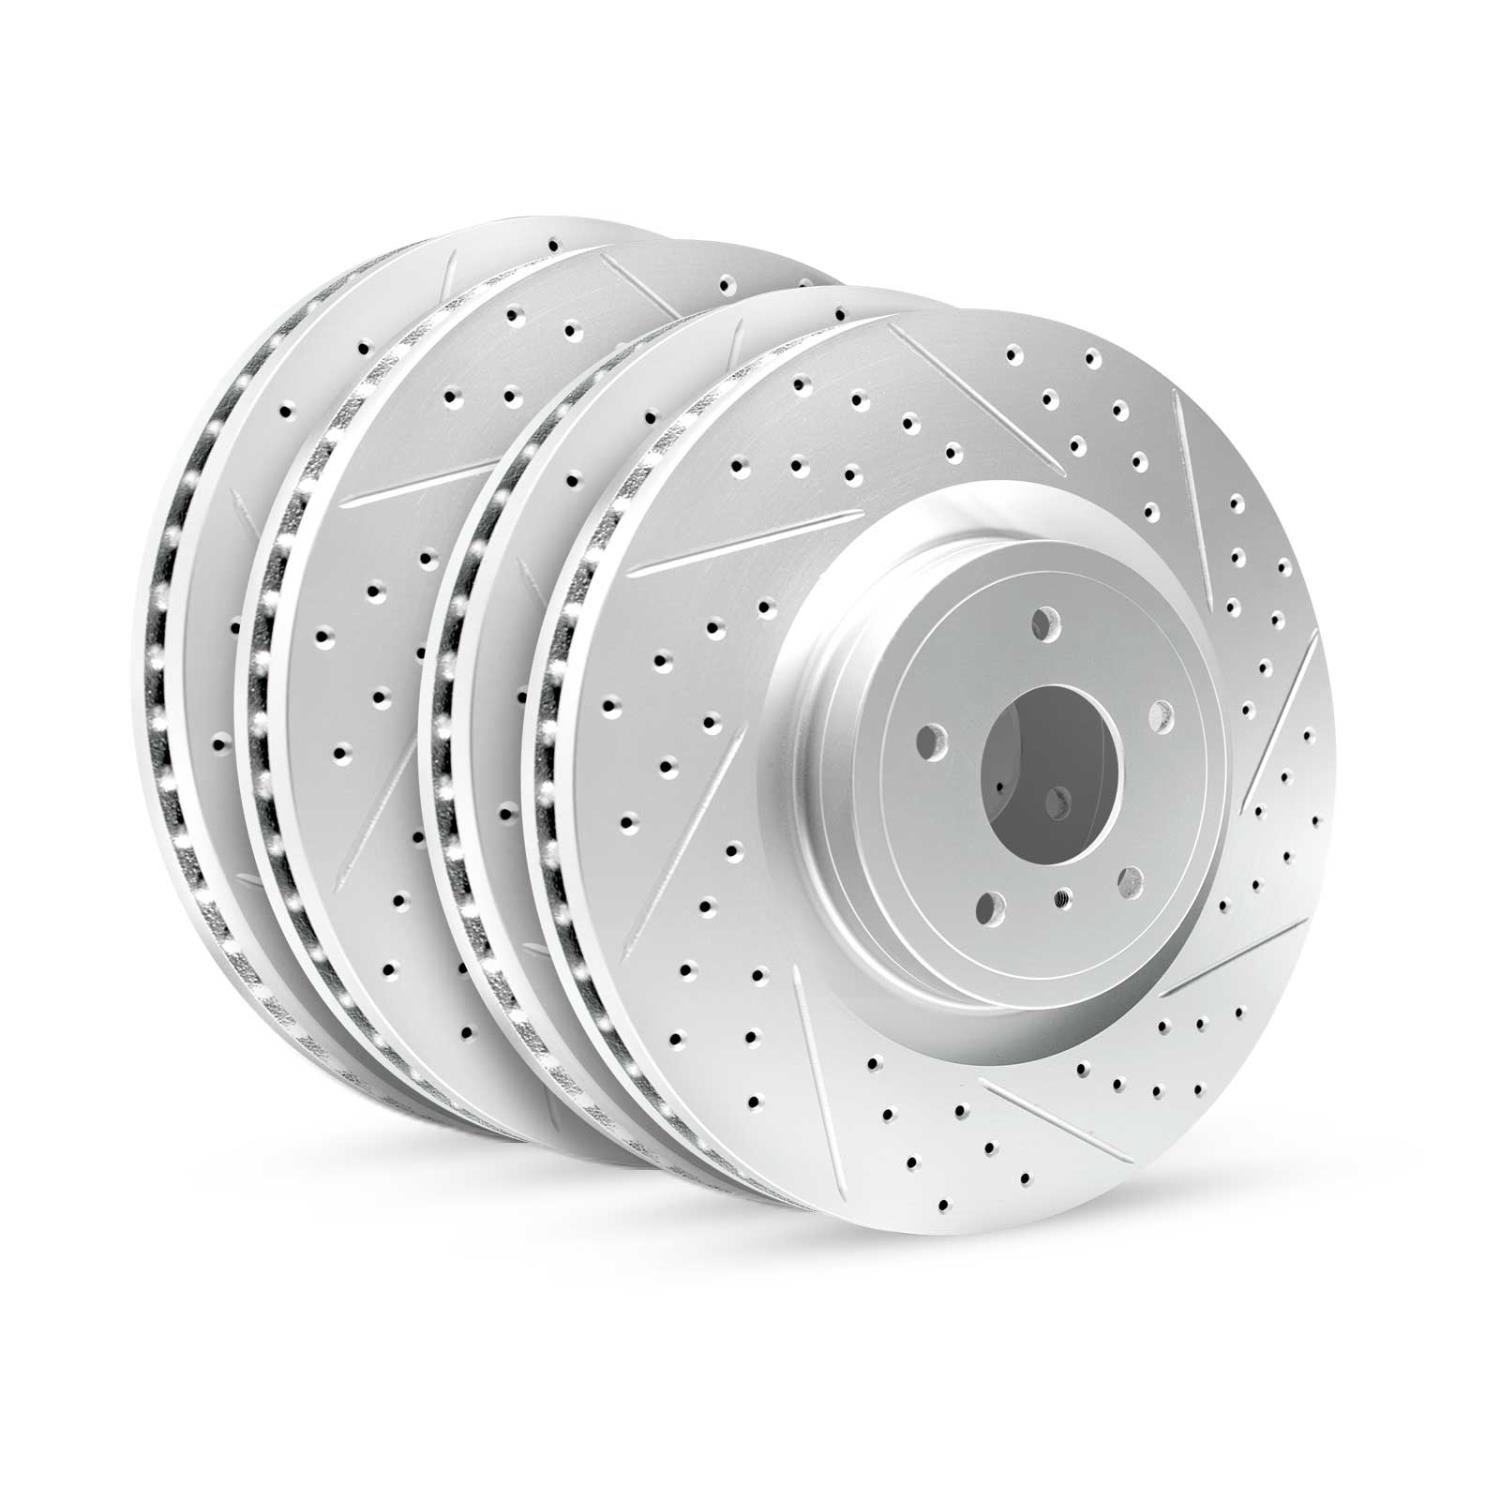 GEO-Carbon Drilled/Slotted Rotors, 2012-2017 Lexus/Toyota/Scion, Position: Front/Rear